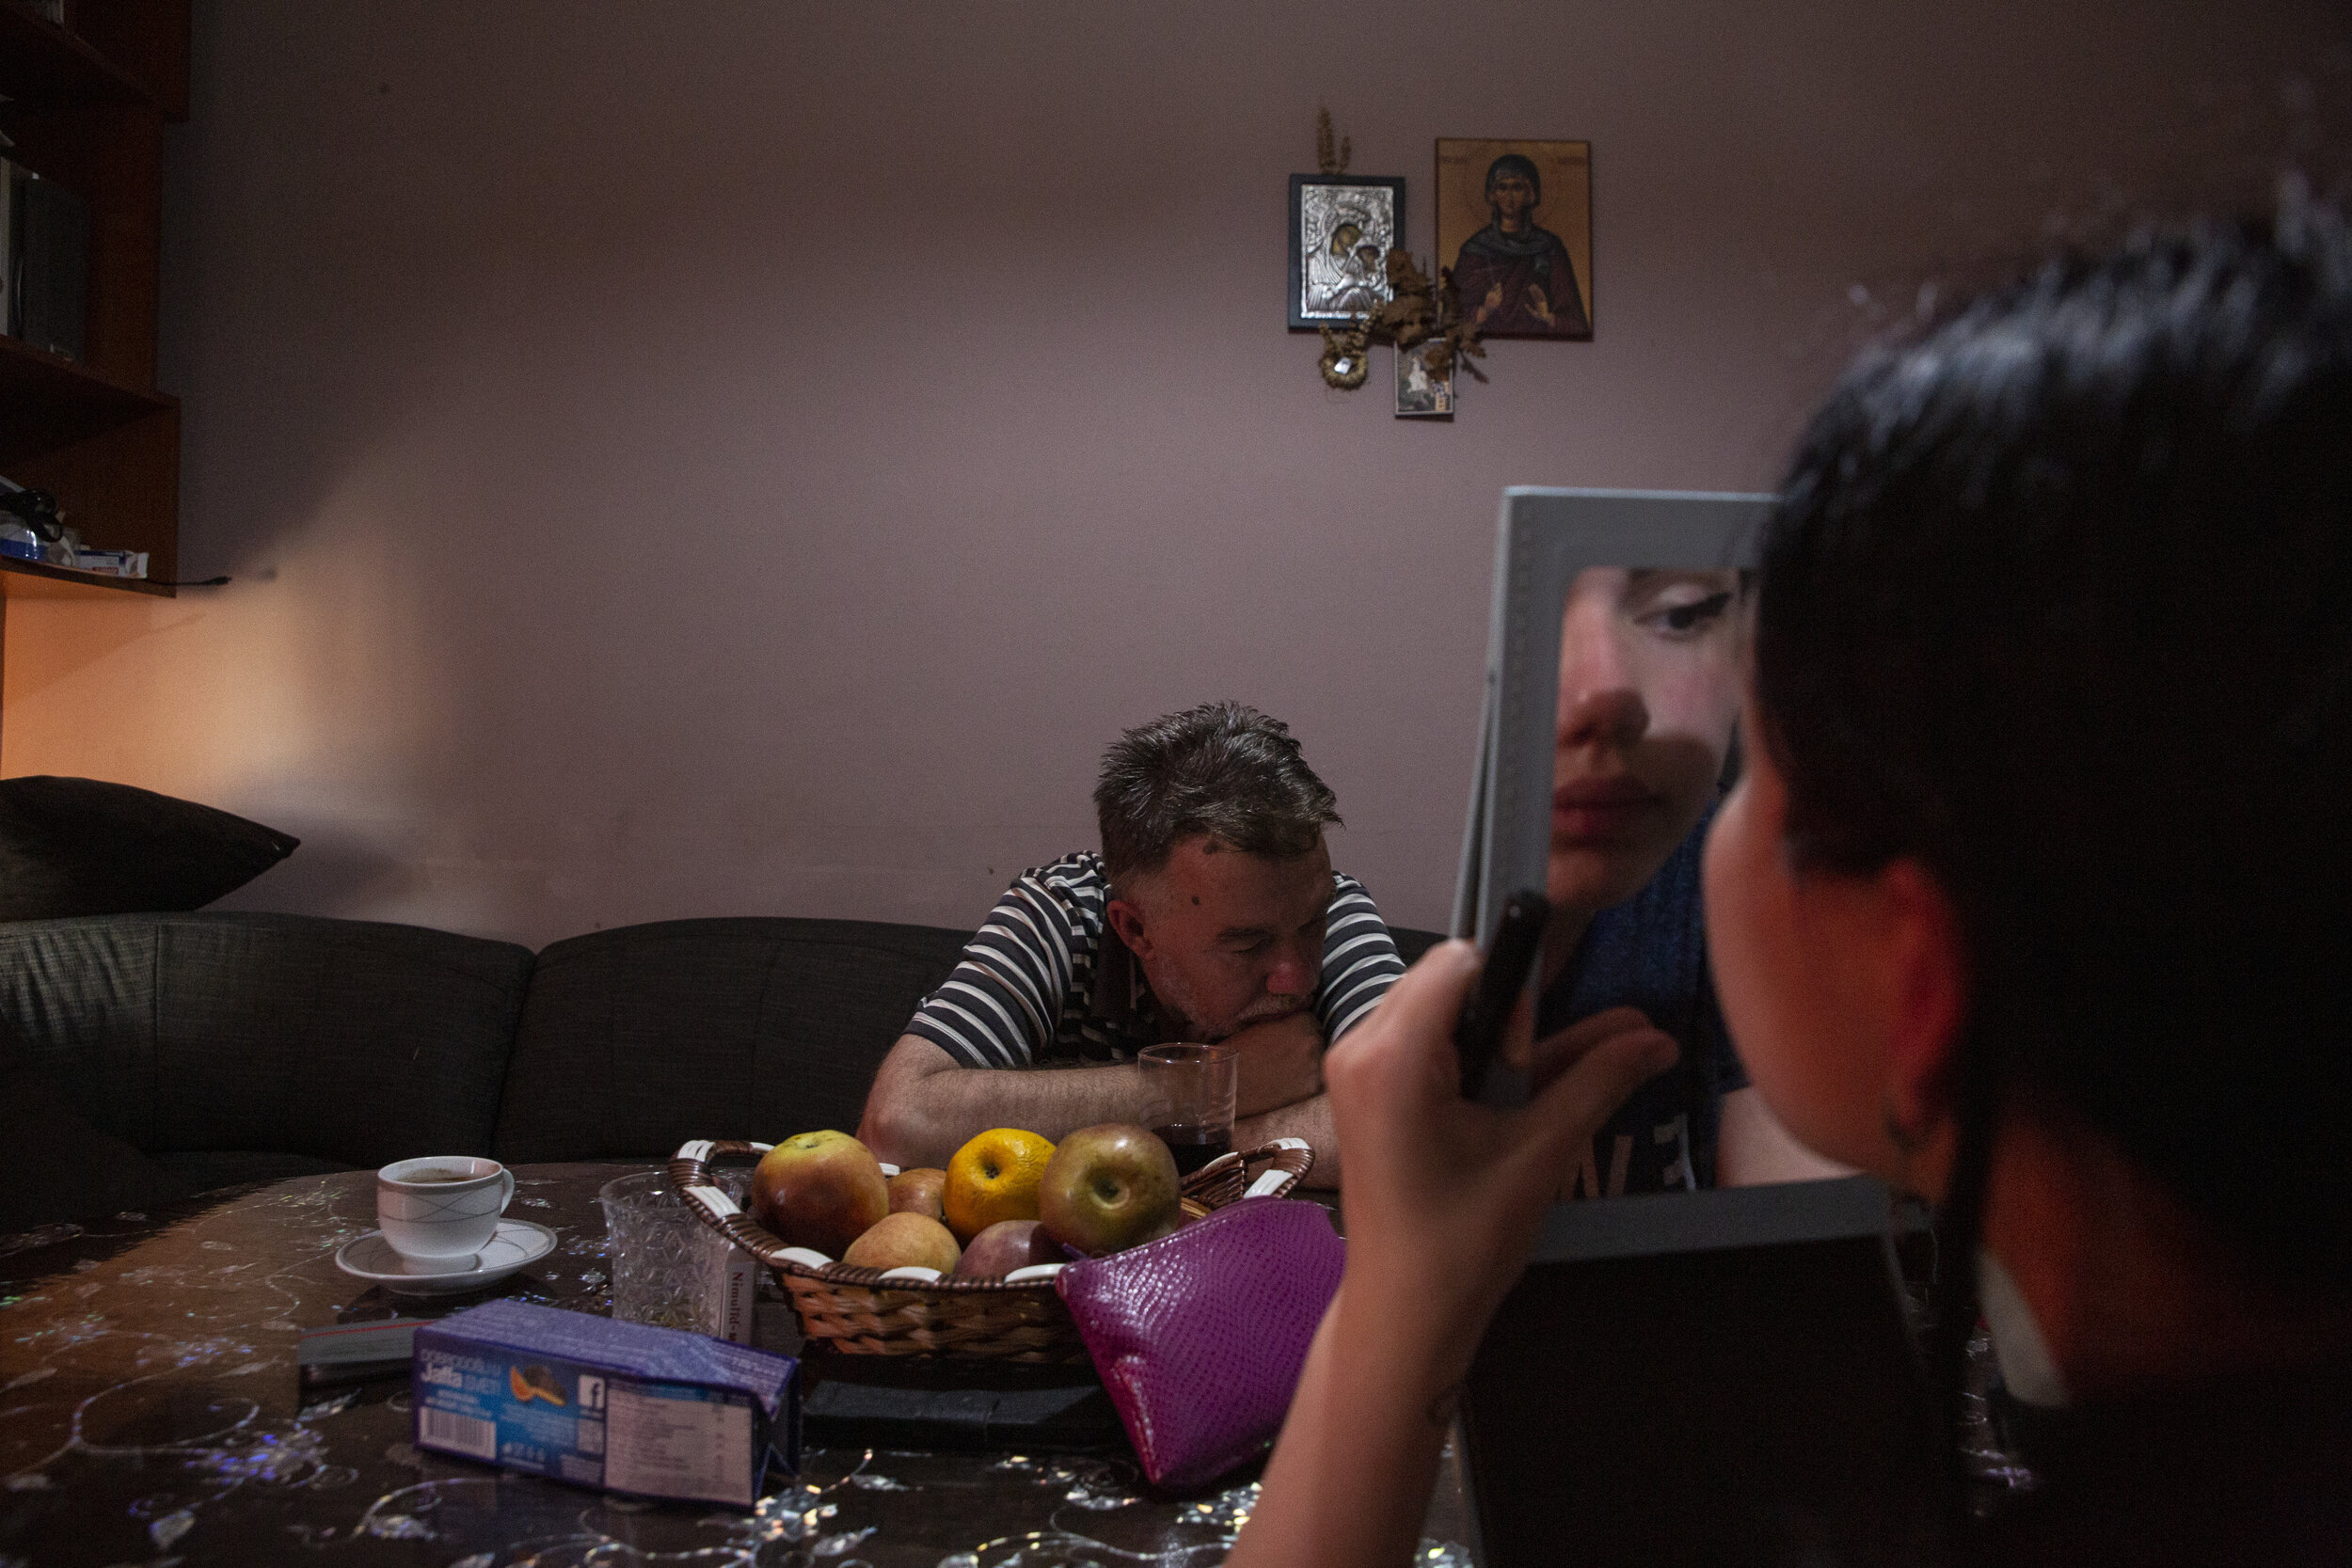  Aleksandra Vajsel, 15, applies makeup at the kitchen table  across from her father before going to meet friends at a cafe in the Serb-majority side of the city, north of the Ibar River. 